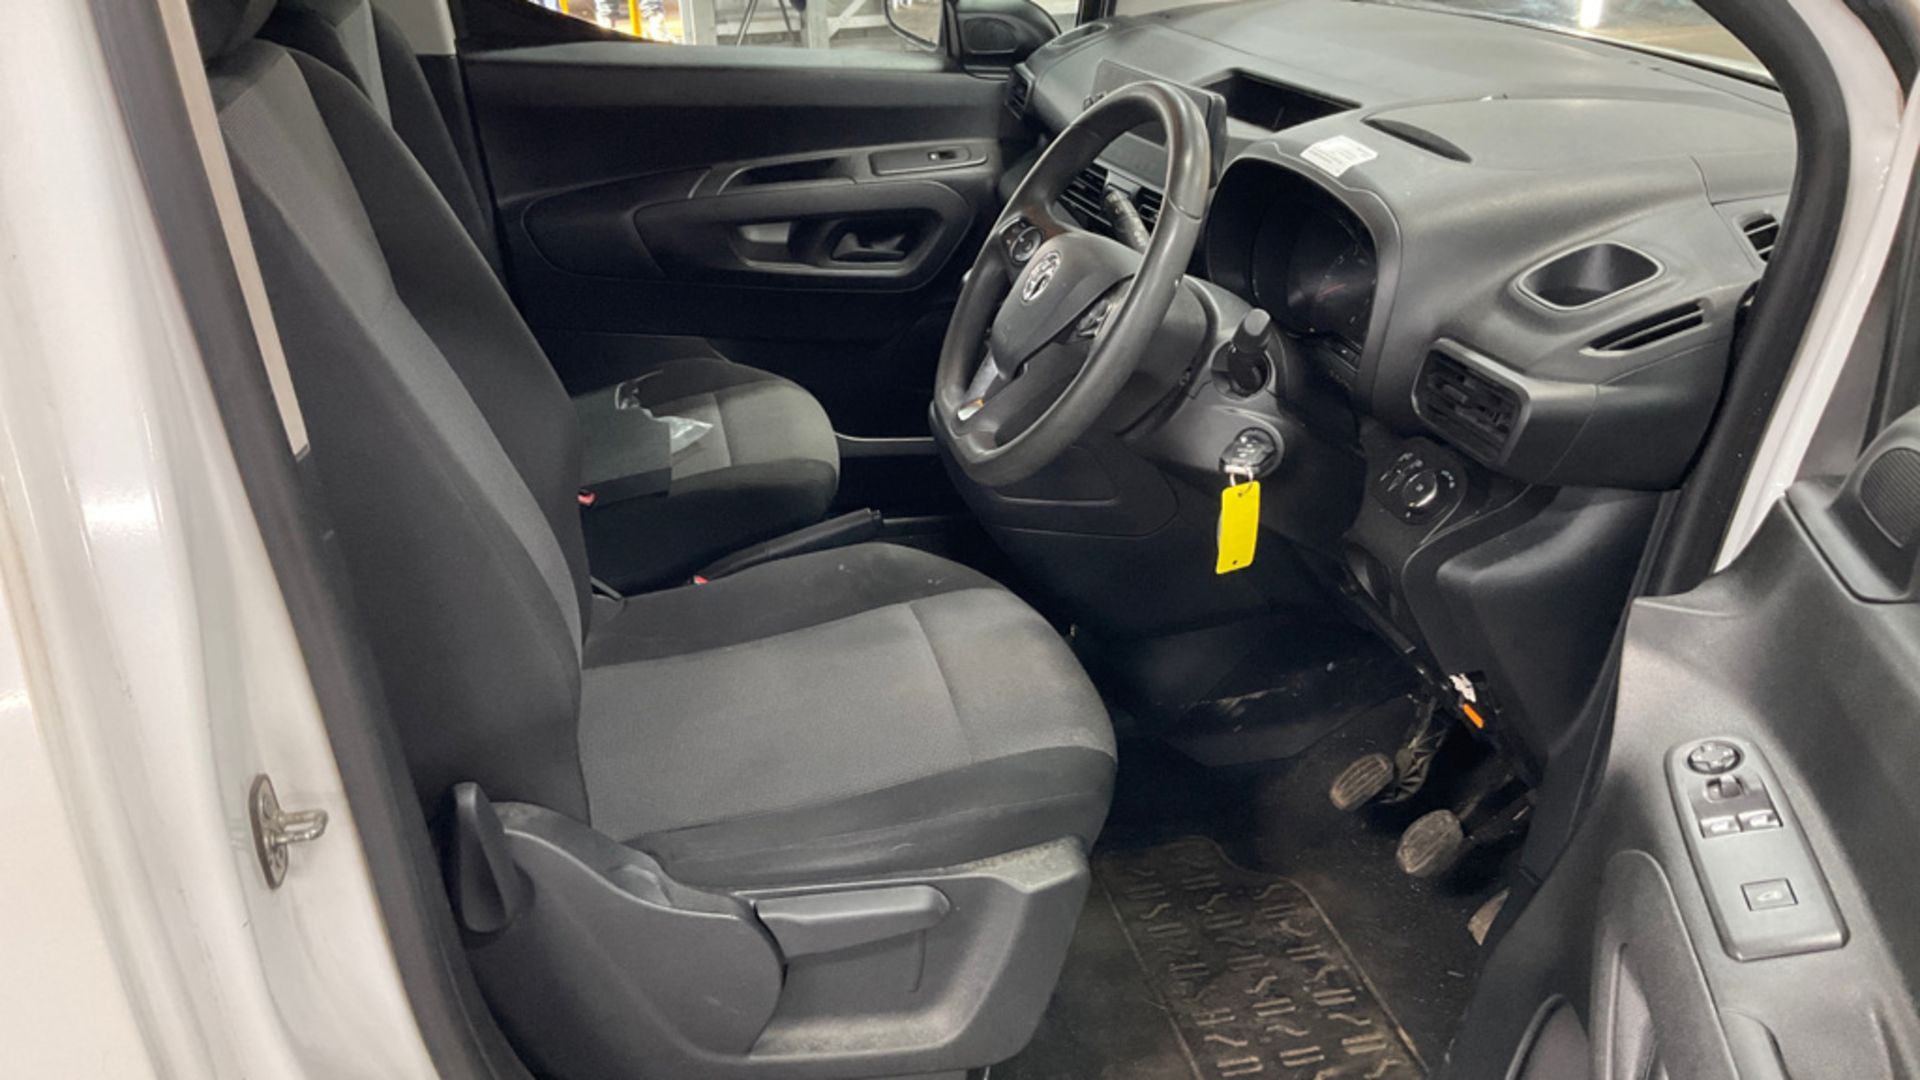 Vauxhall Combo 1.5 Cdti "Sportive" 2020 Reg - 1 Owner - Air Con , Mileage Is Only 79k Miles With FSH - Bild 7 aus 8